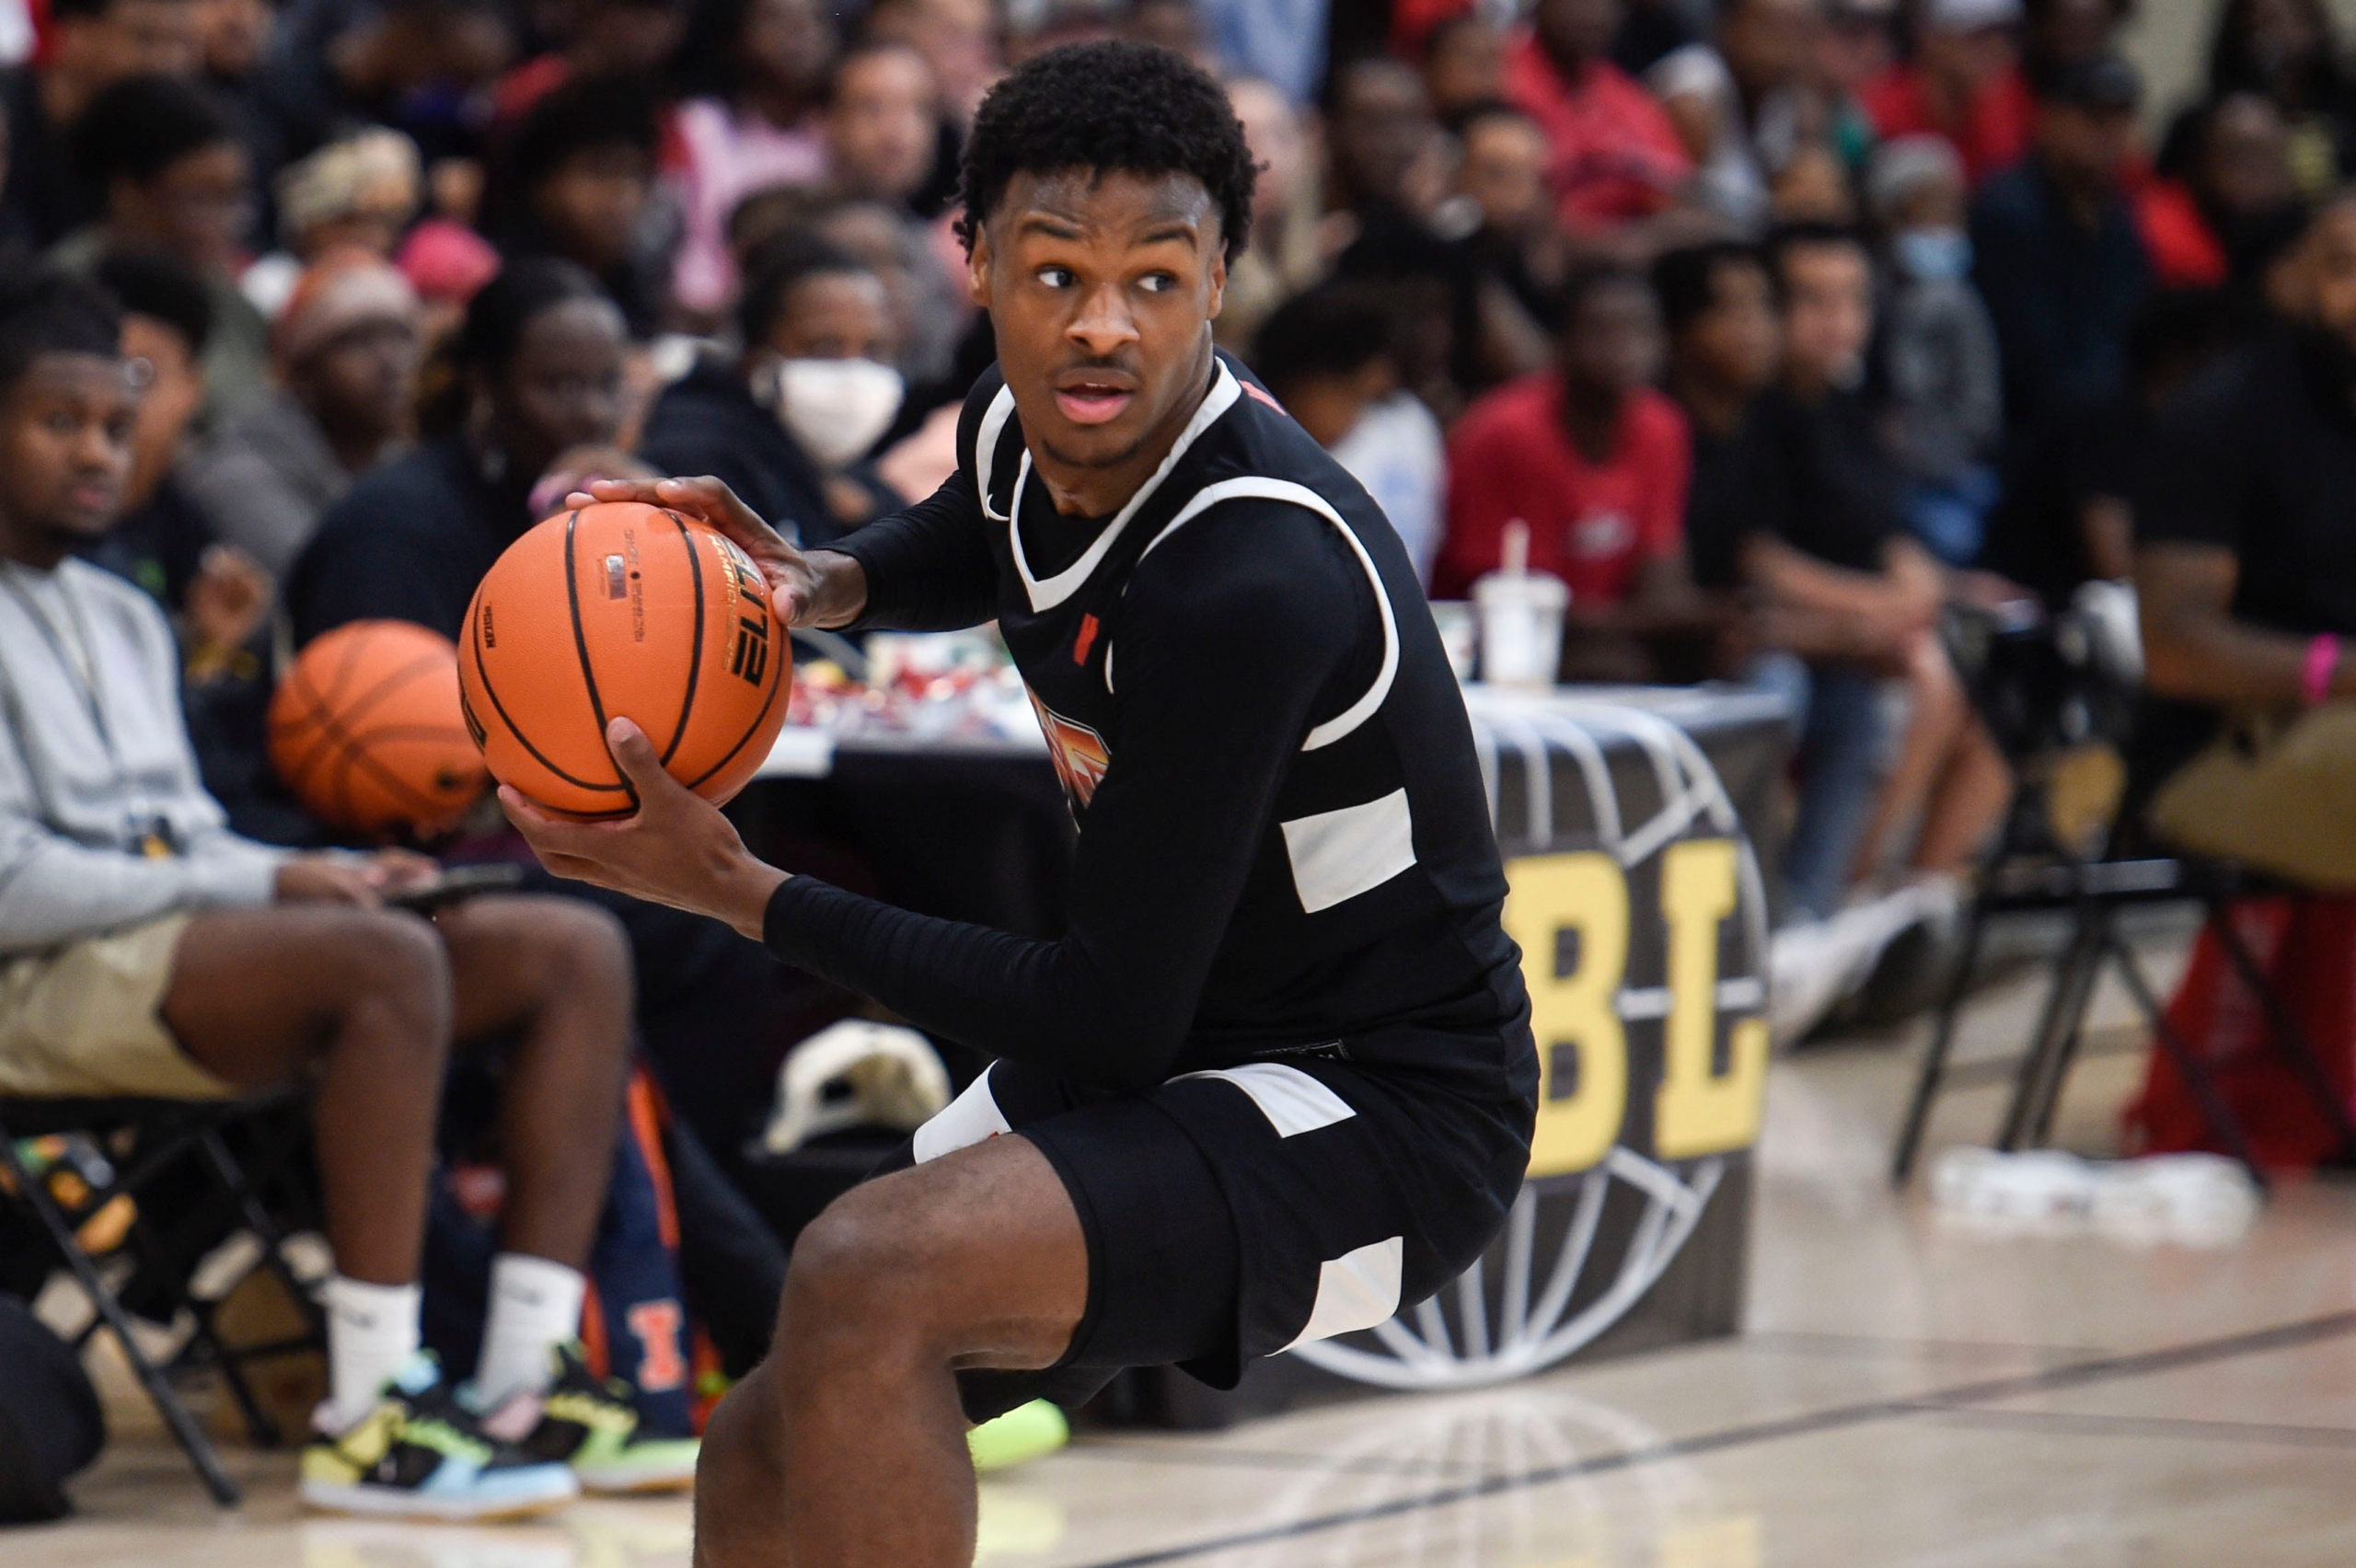 Bronny James favored to land with the Oregon Ducks in 2023